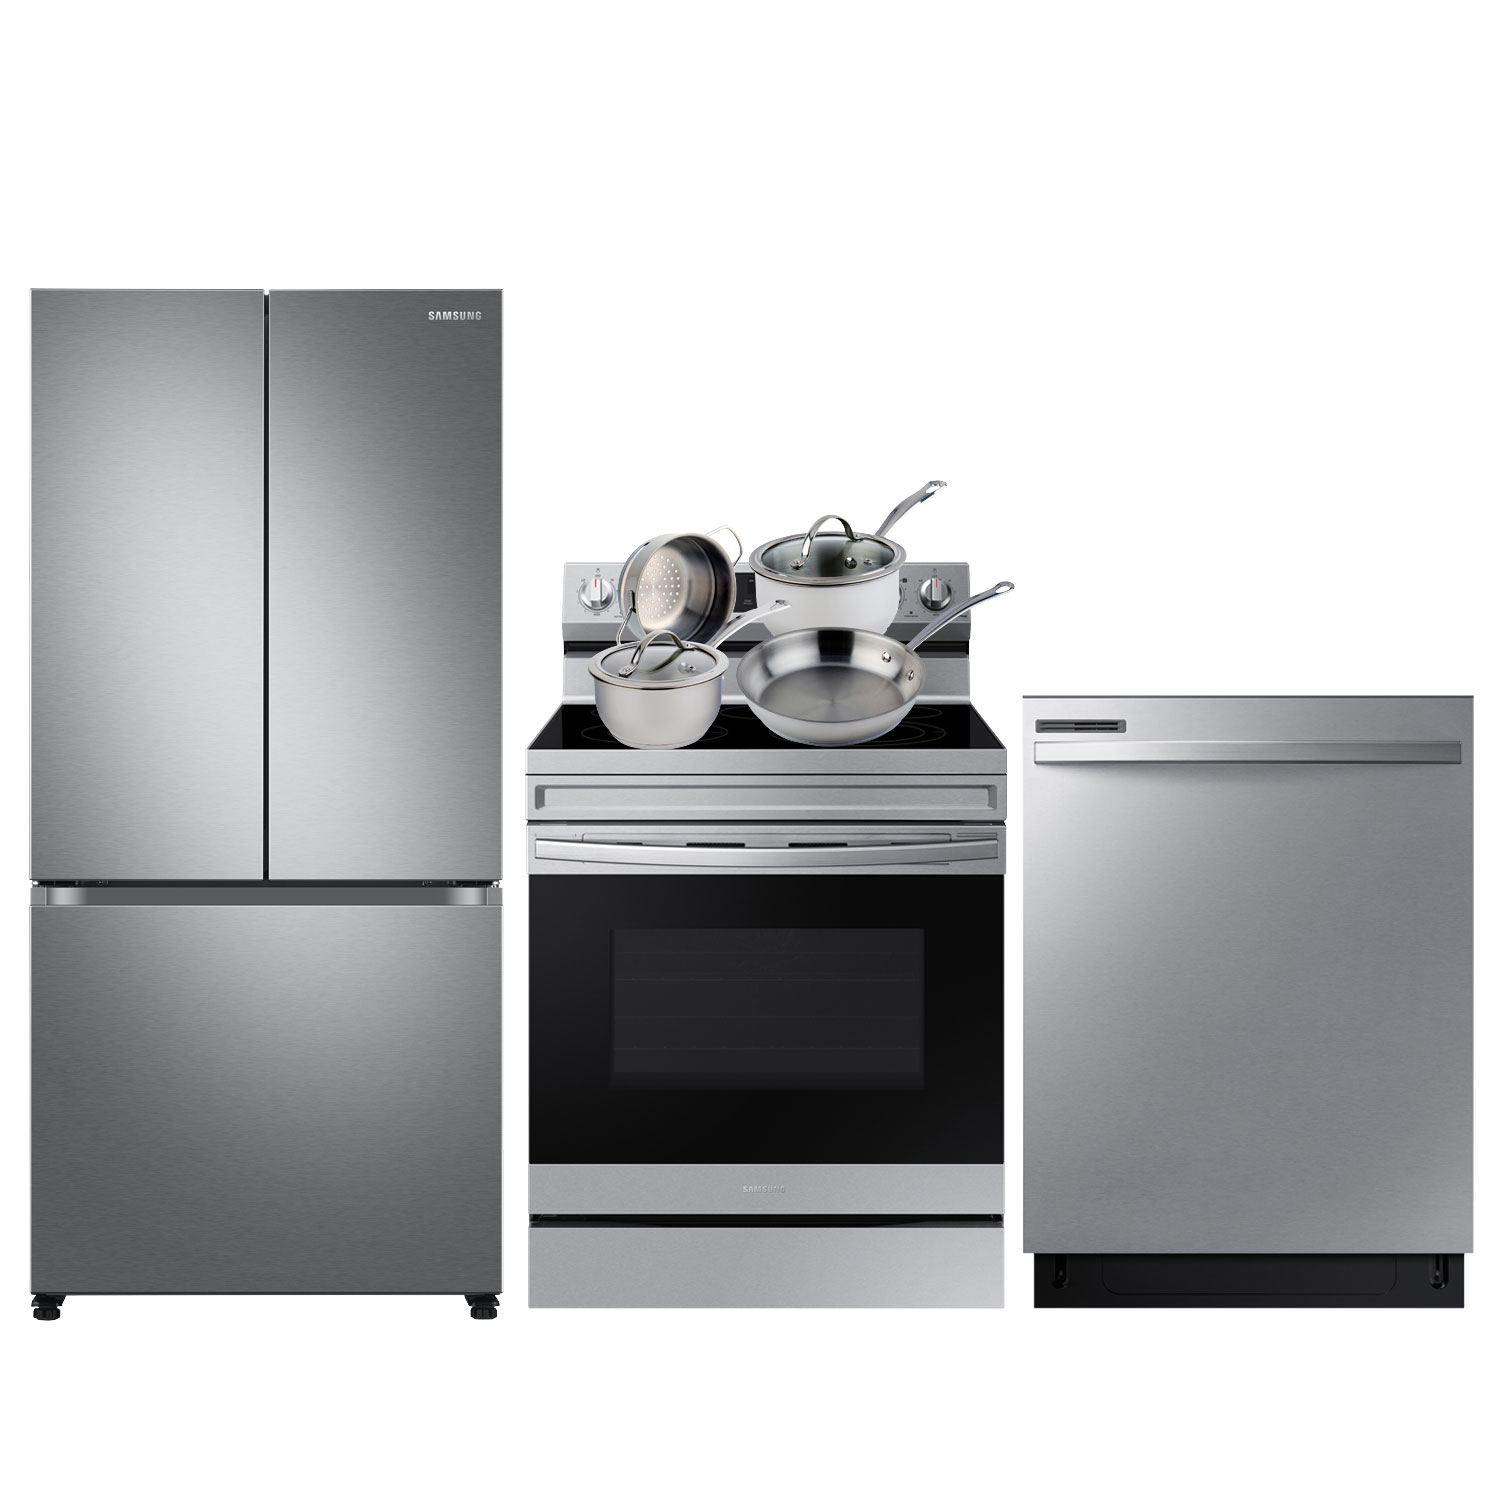 Samsung 33" 17.5 Cu. Ft. French Door Refrigerator; Electric Air Fry Range; Dishwasher; Cookware Set - SS